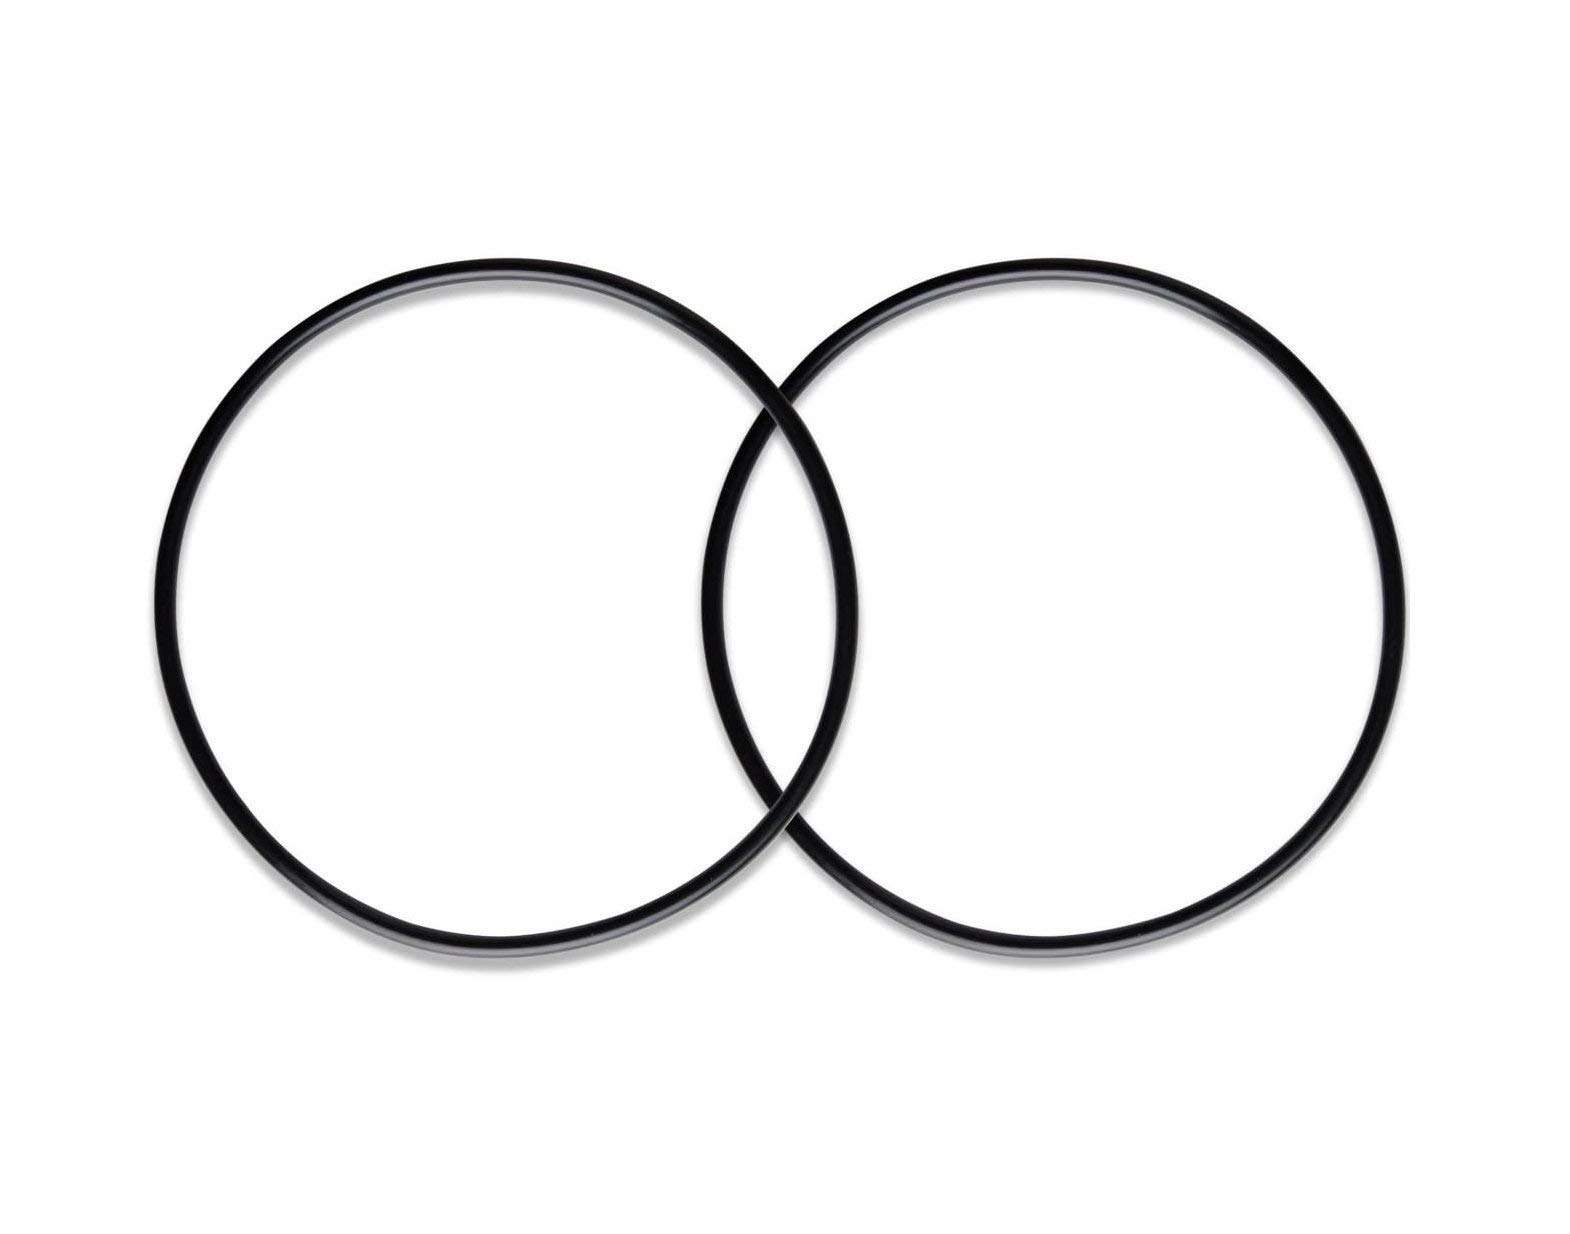 IPW Industries Inc. Compatible AO-WH-STD-OR-2 - Whole House Water Filter O-Rings 3.44 Inch 9 Cm Actual Diameter Fits Housings Designed for 2.5 Inch Filters - 2 Pack